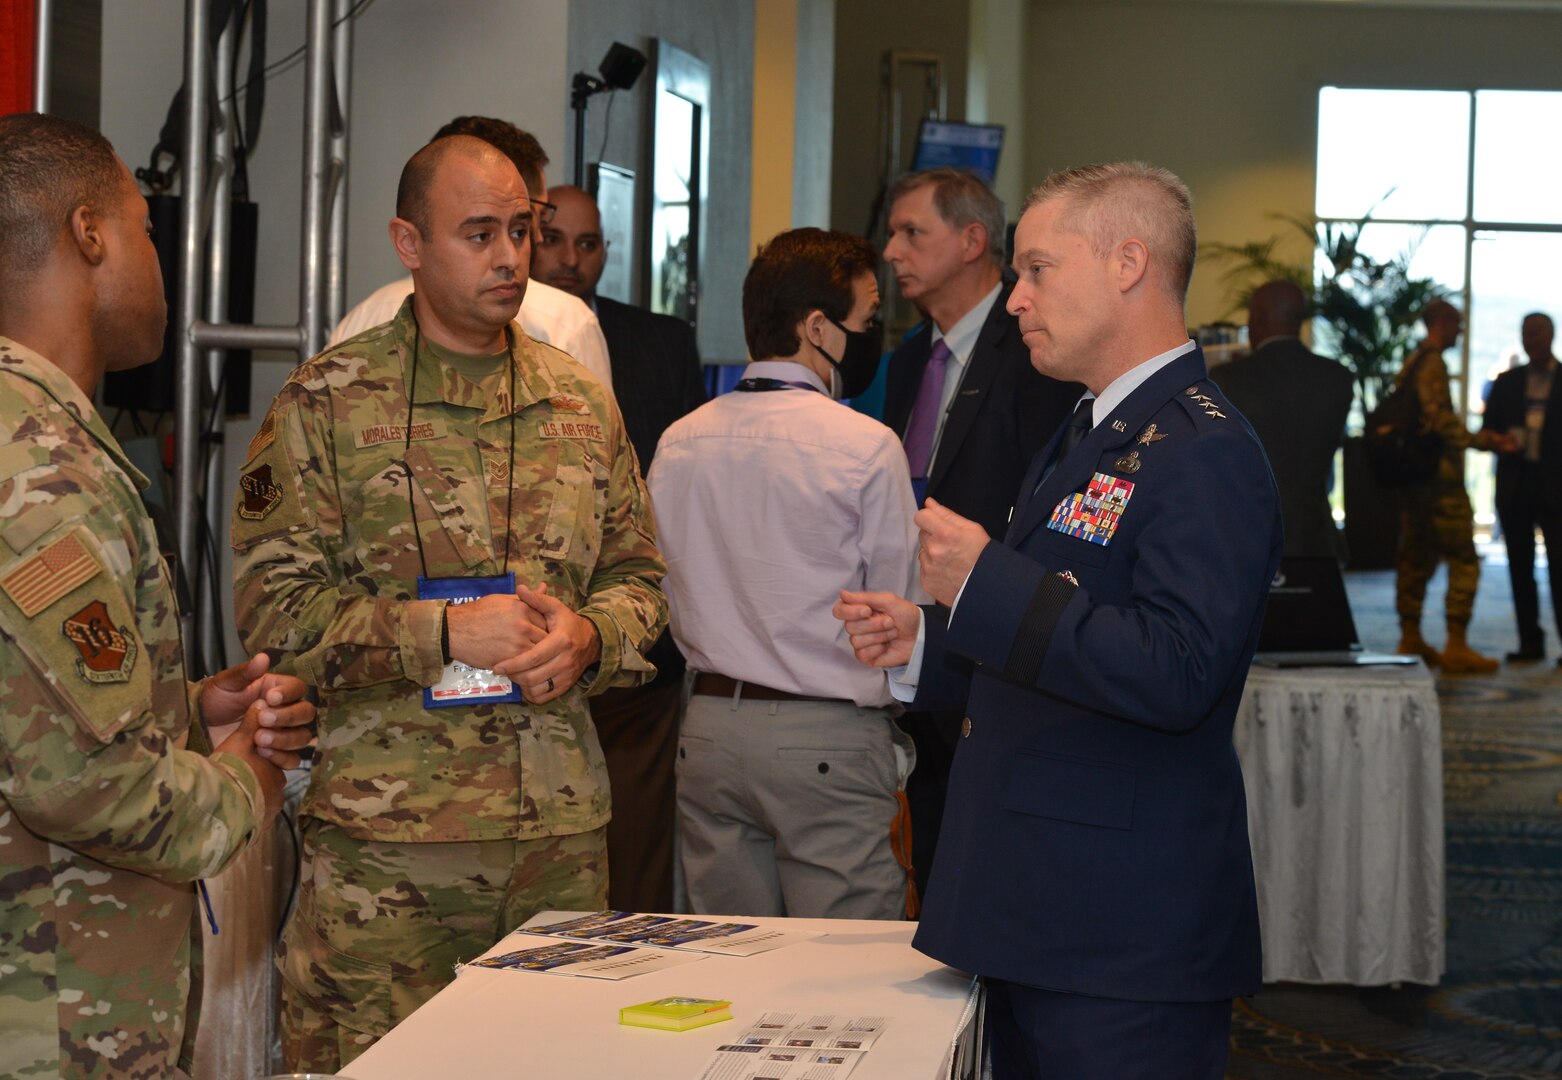 16th Air Force commander speaks to Airmen at a booth.